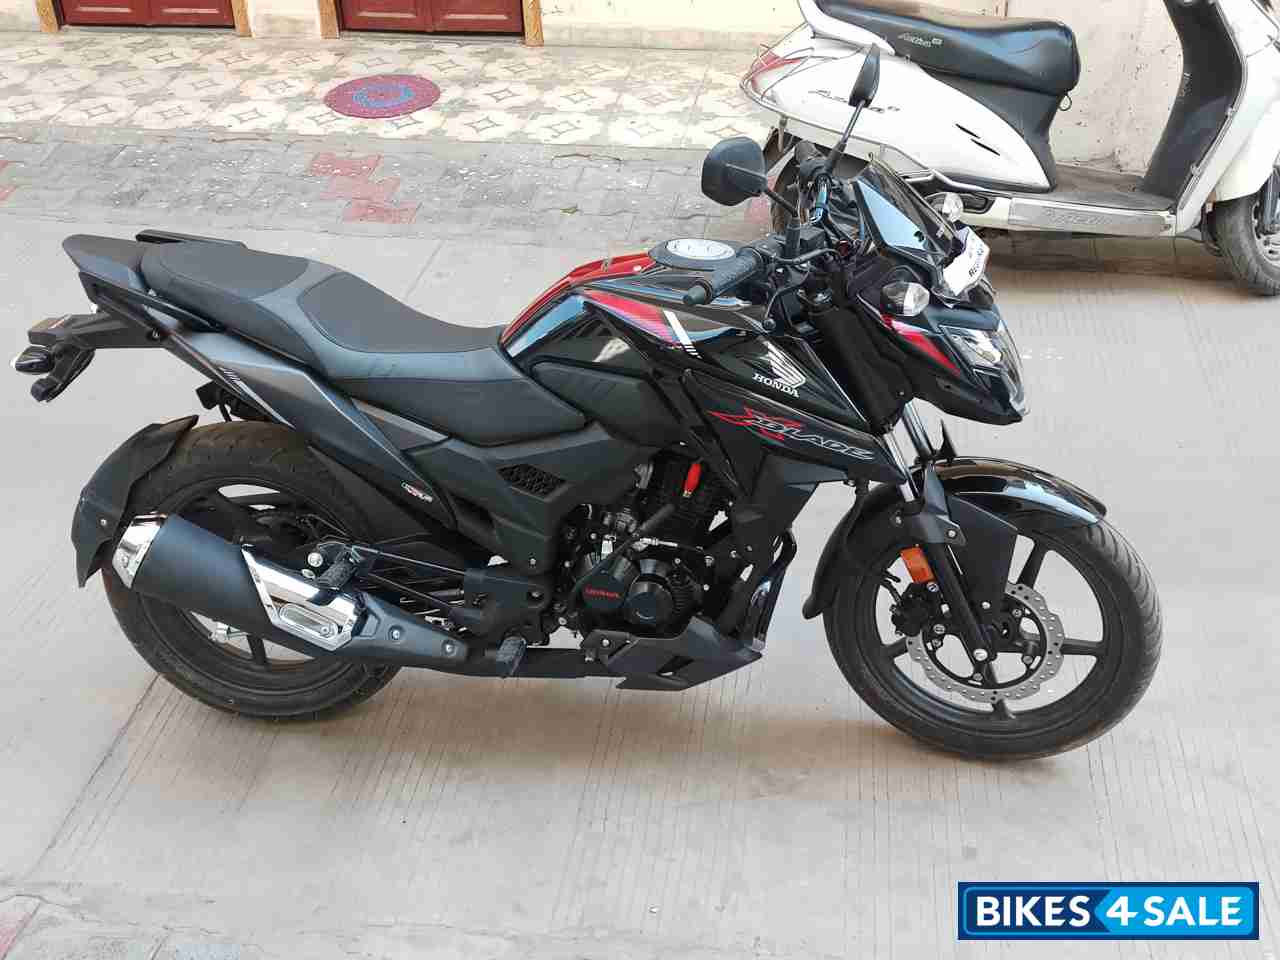 Honda X Blade 2nd Hand Online Sales, UP TO 61% OFF | www ...